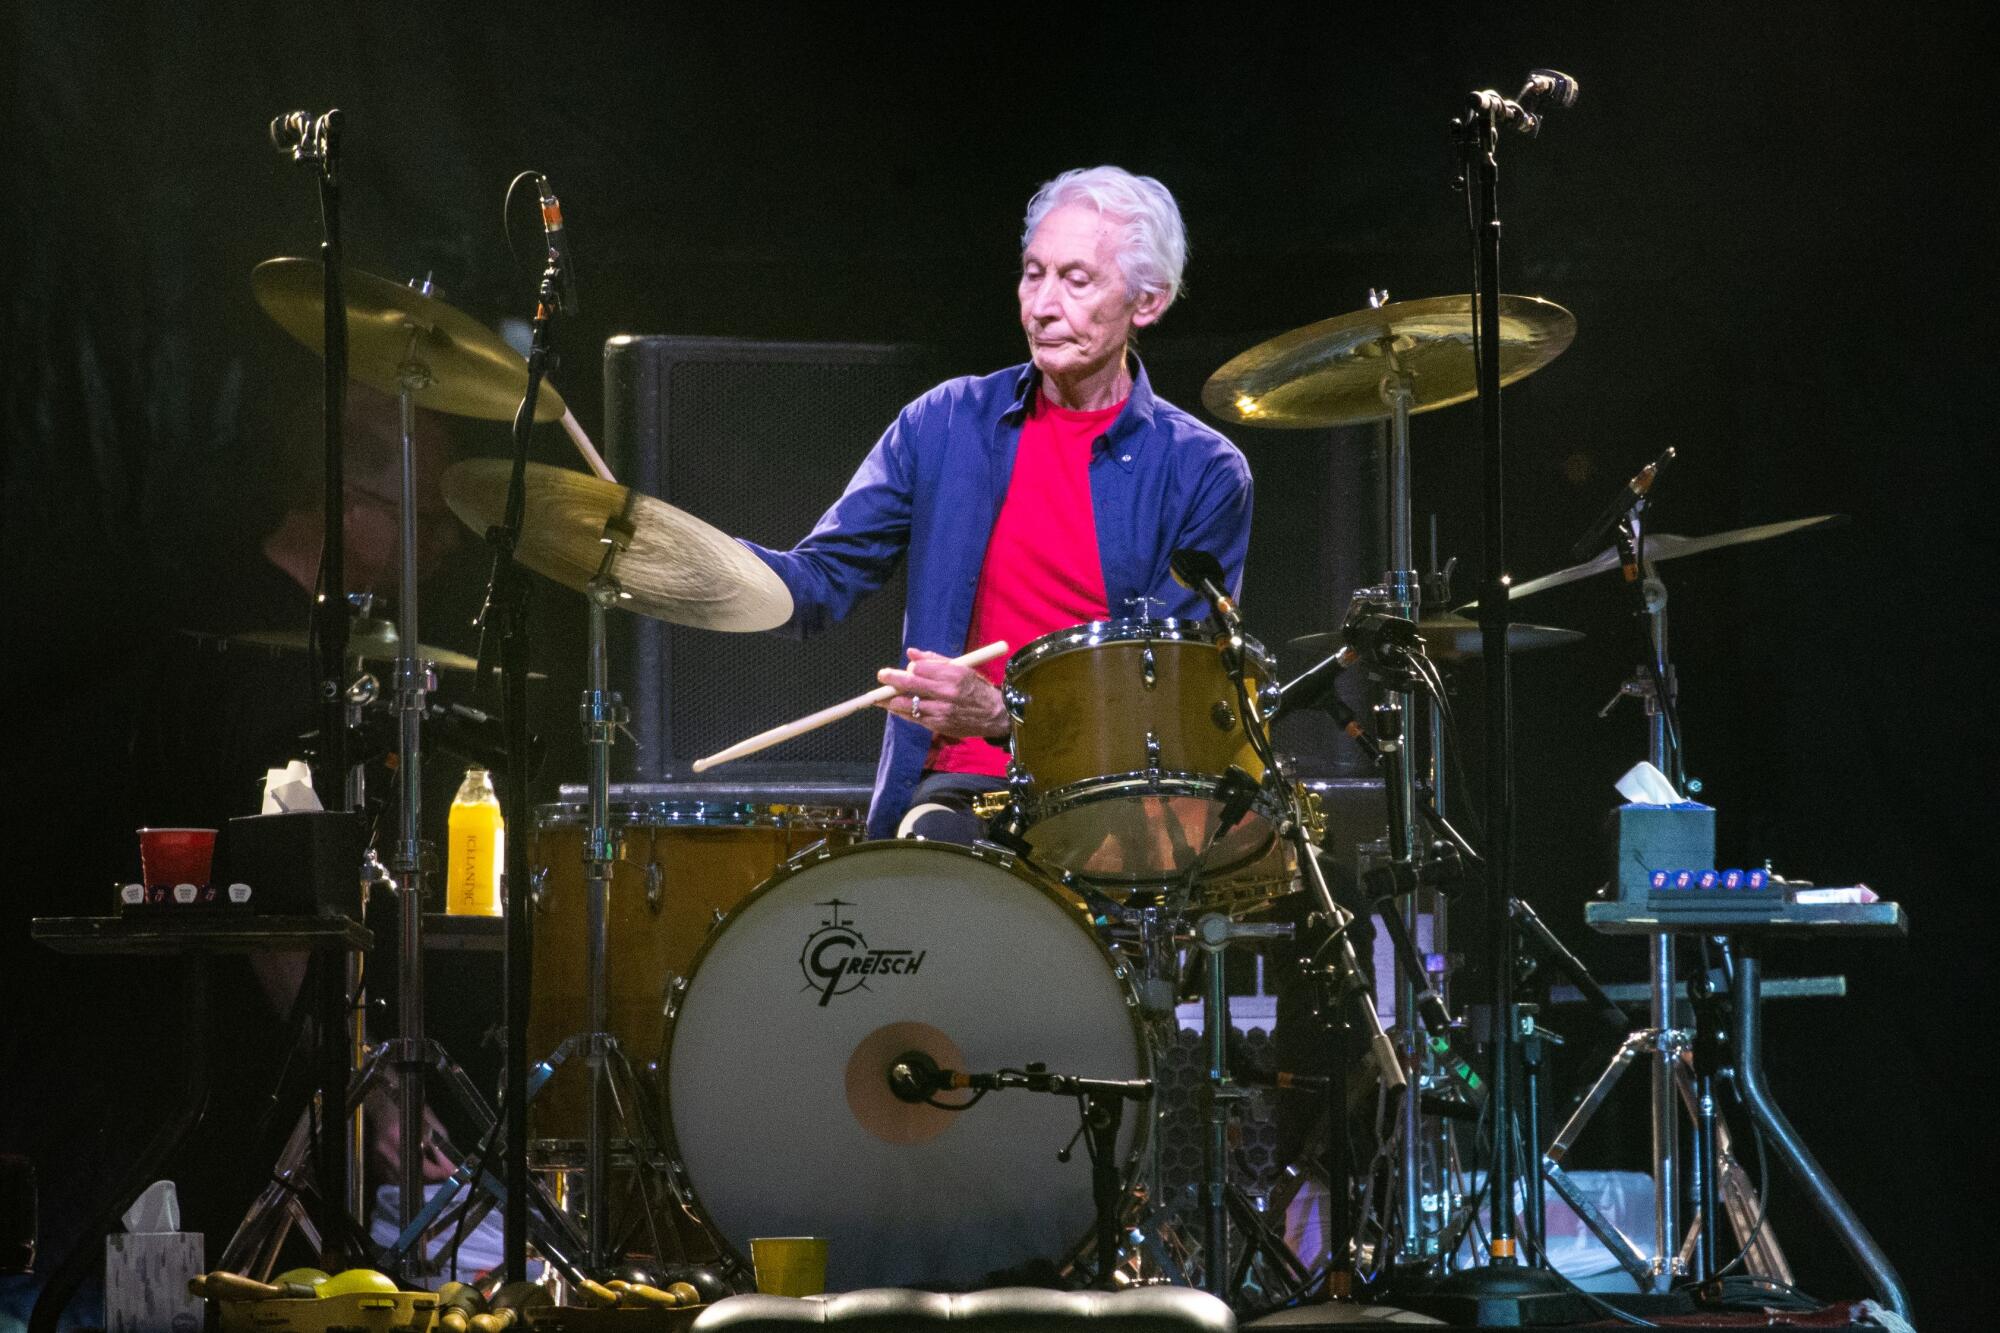 Rolling Stones drummer Charlie Watts plays during the band's No Filter tour at NRG Stadium in 2019.